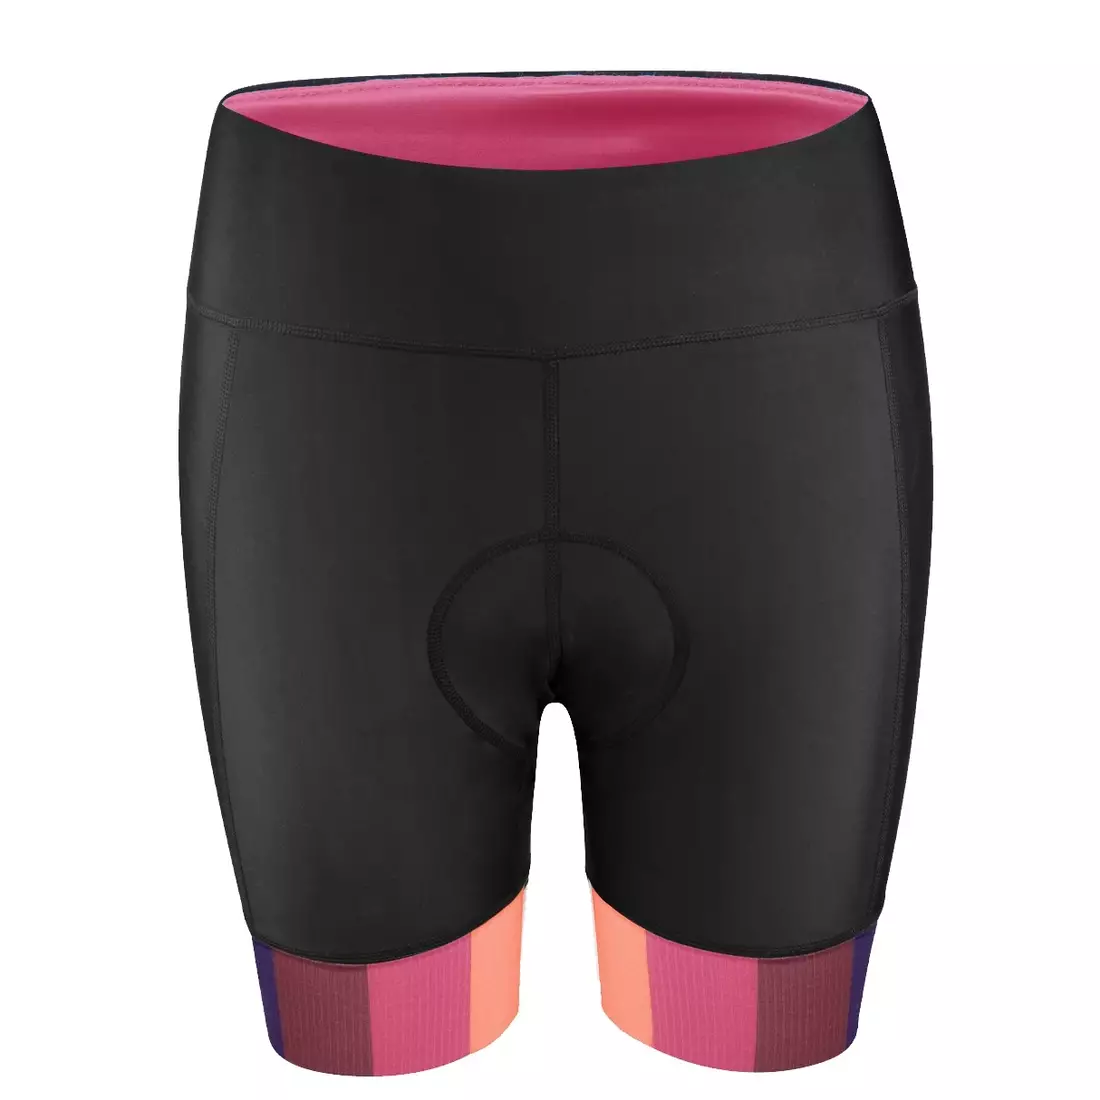 FORCE VICTORY women's cycling shorts with an insert, black and pink